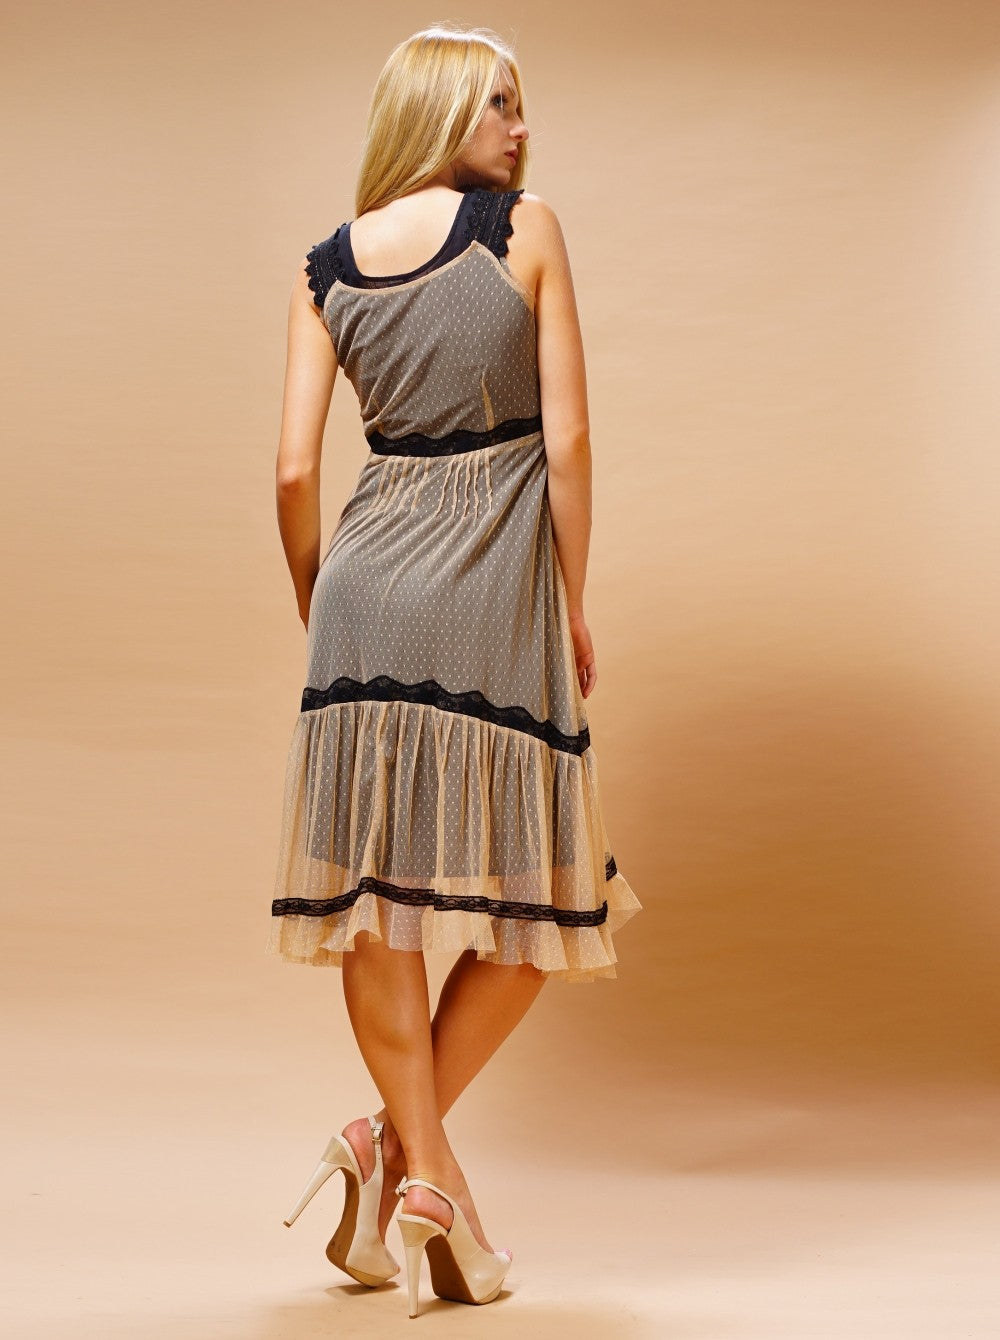 Bohemian Vintage Inspired Dress in Black-Beige by Nataya - SOLD OUT